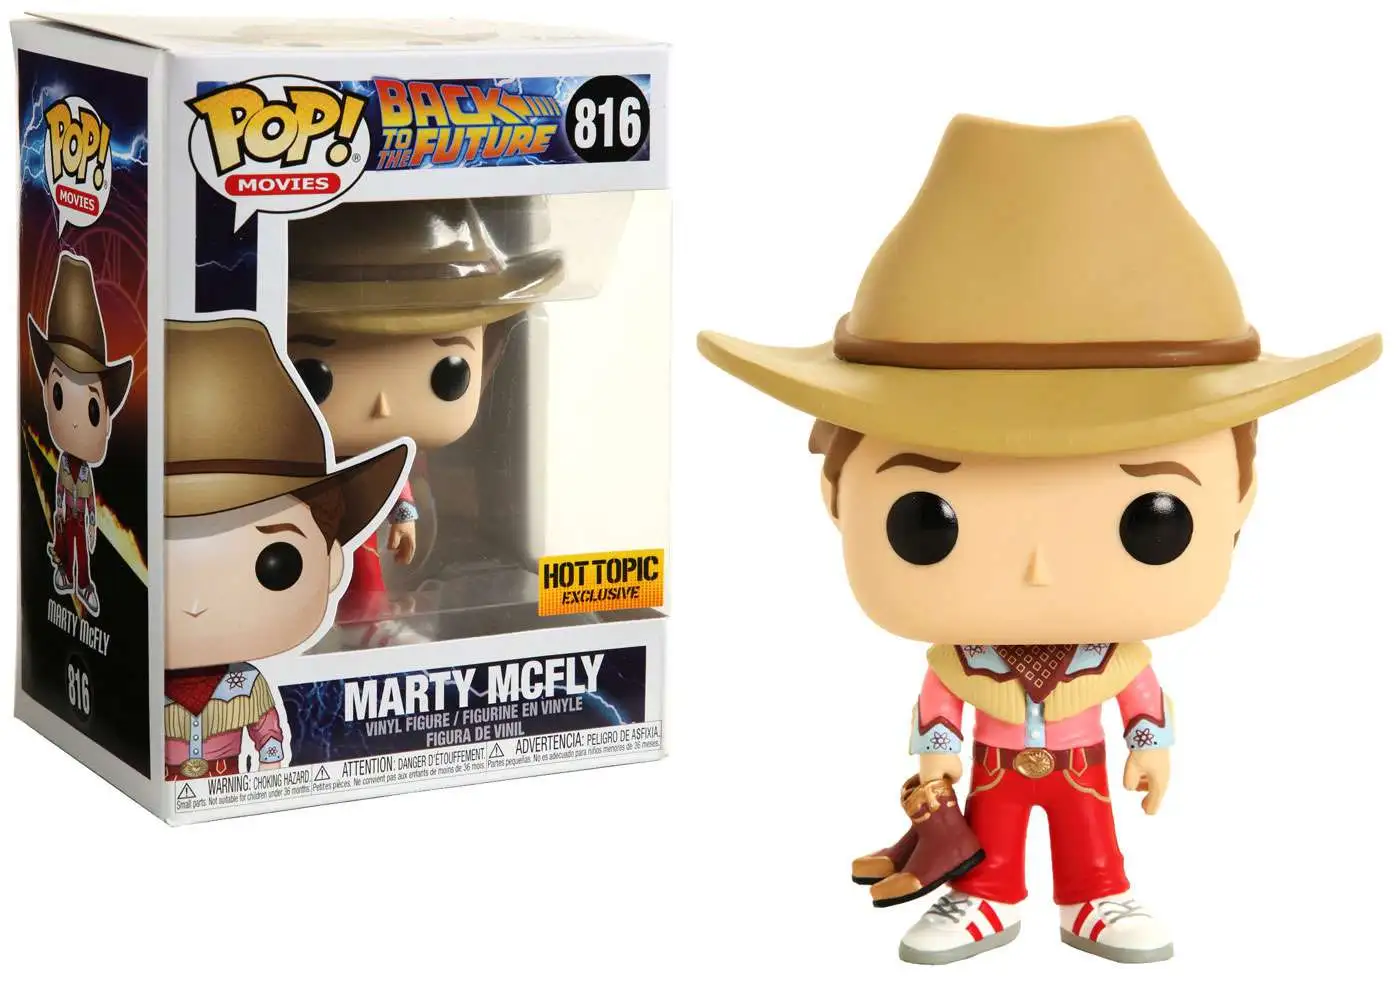 VINYL IDOLZ Back To The Future Marty McFly & Dr Emmett Brown 8" Action Figures 